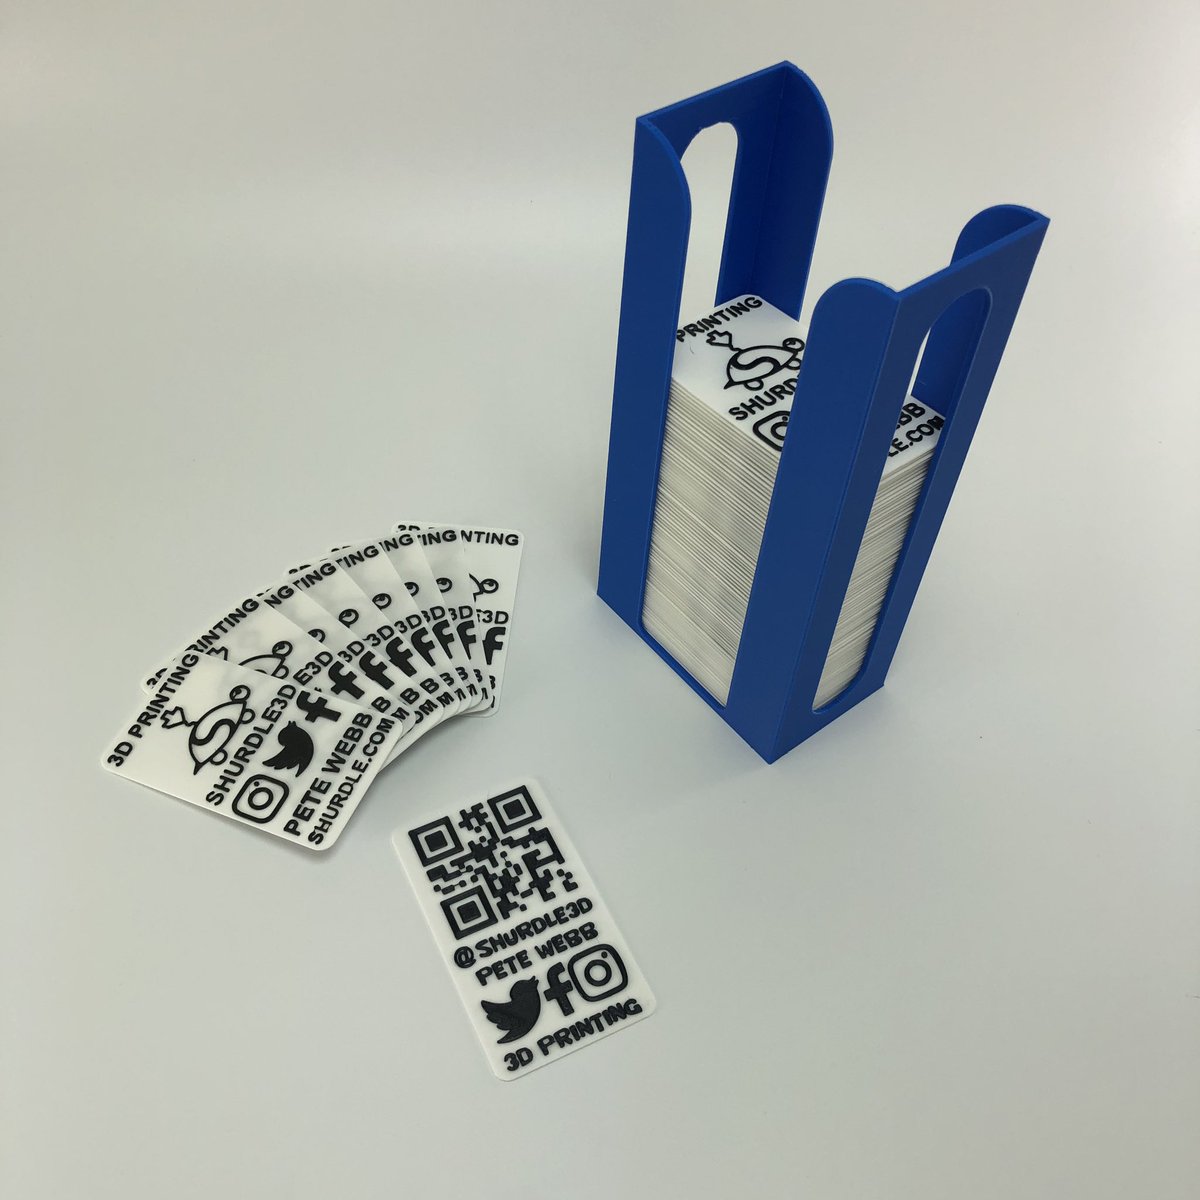 Shurdle3d On Twitter Plastic 3d Printed Business Cards Custom Made To Your Needs Can Even Put Qr Codes That Work As You Can See In The Scrnshot One Of These Goes In